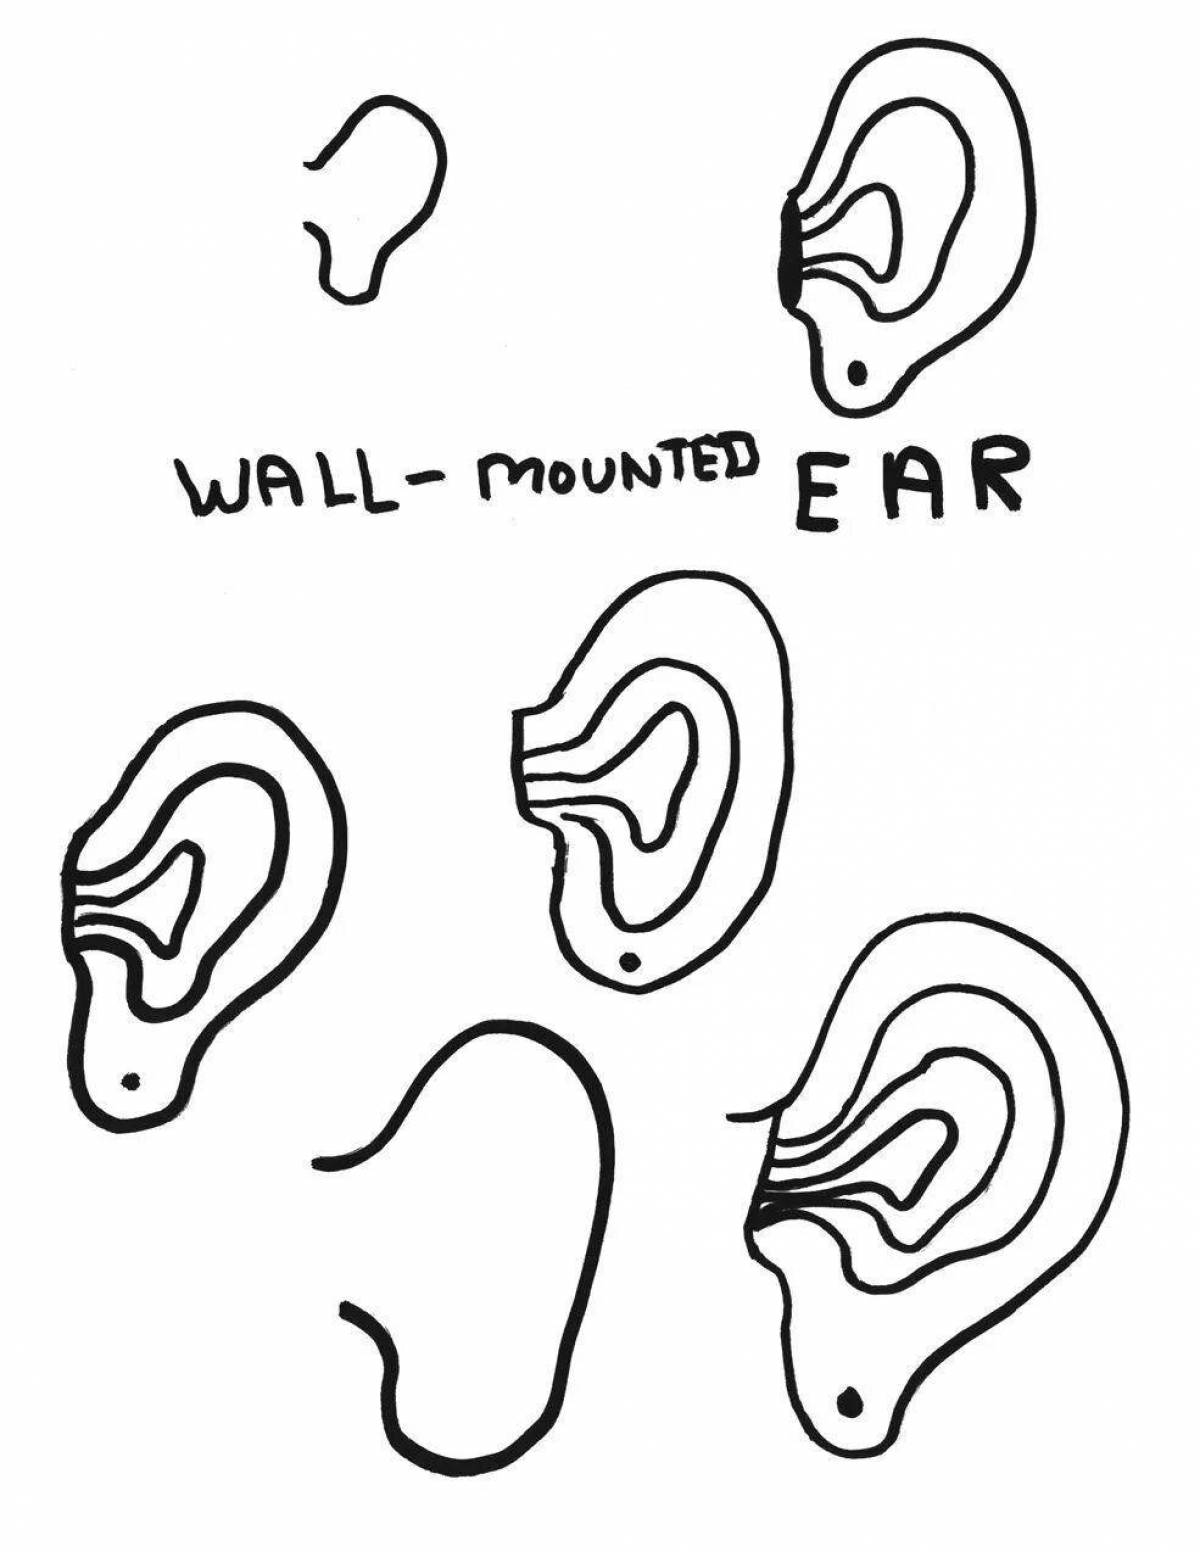 Interesting ear coloring page for kids